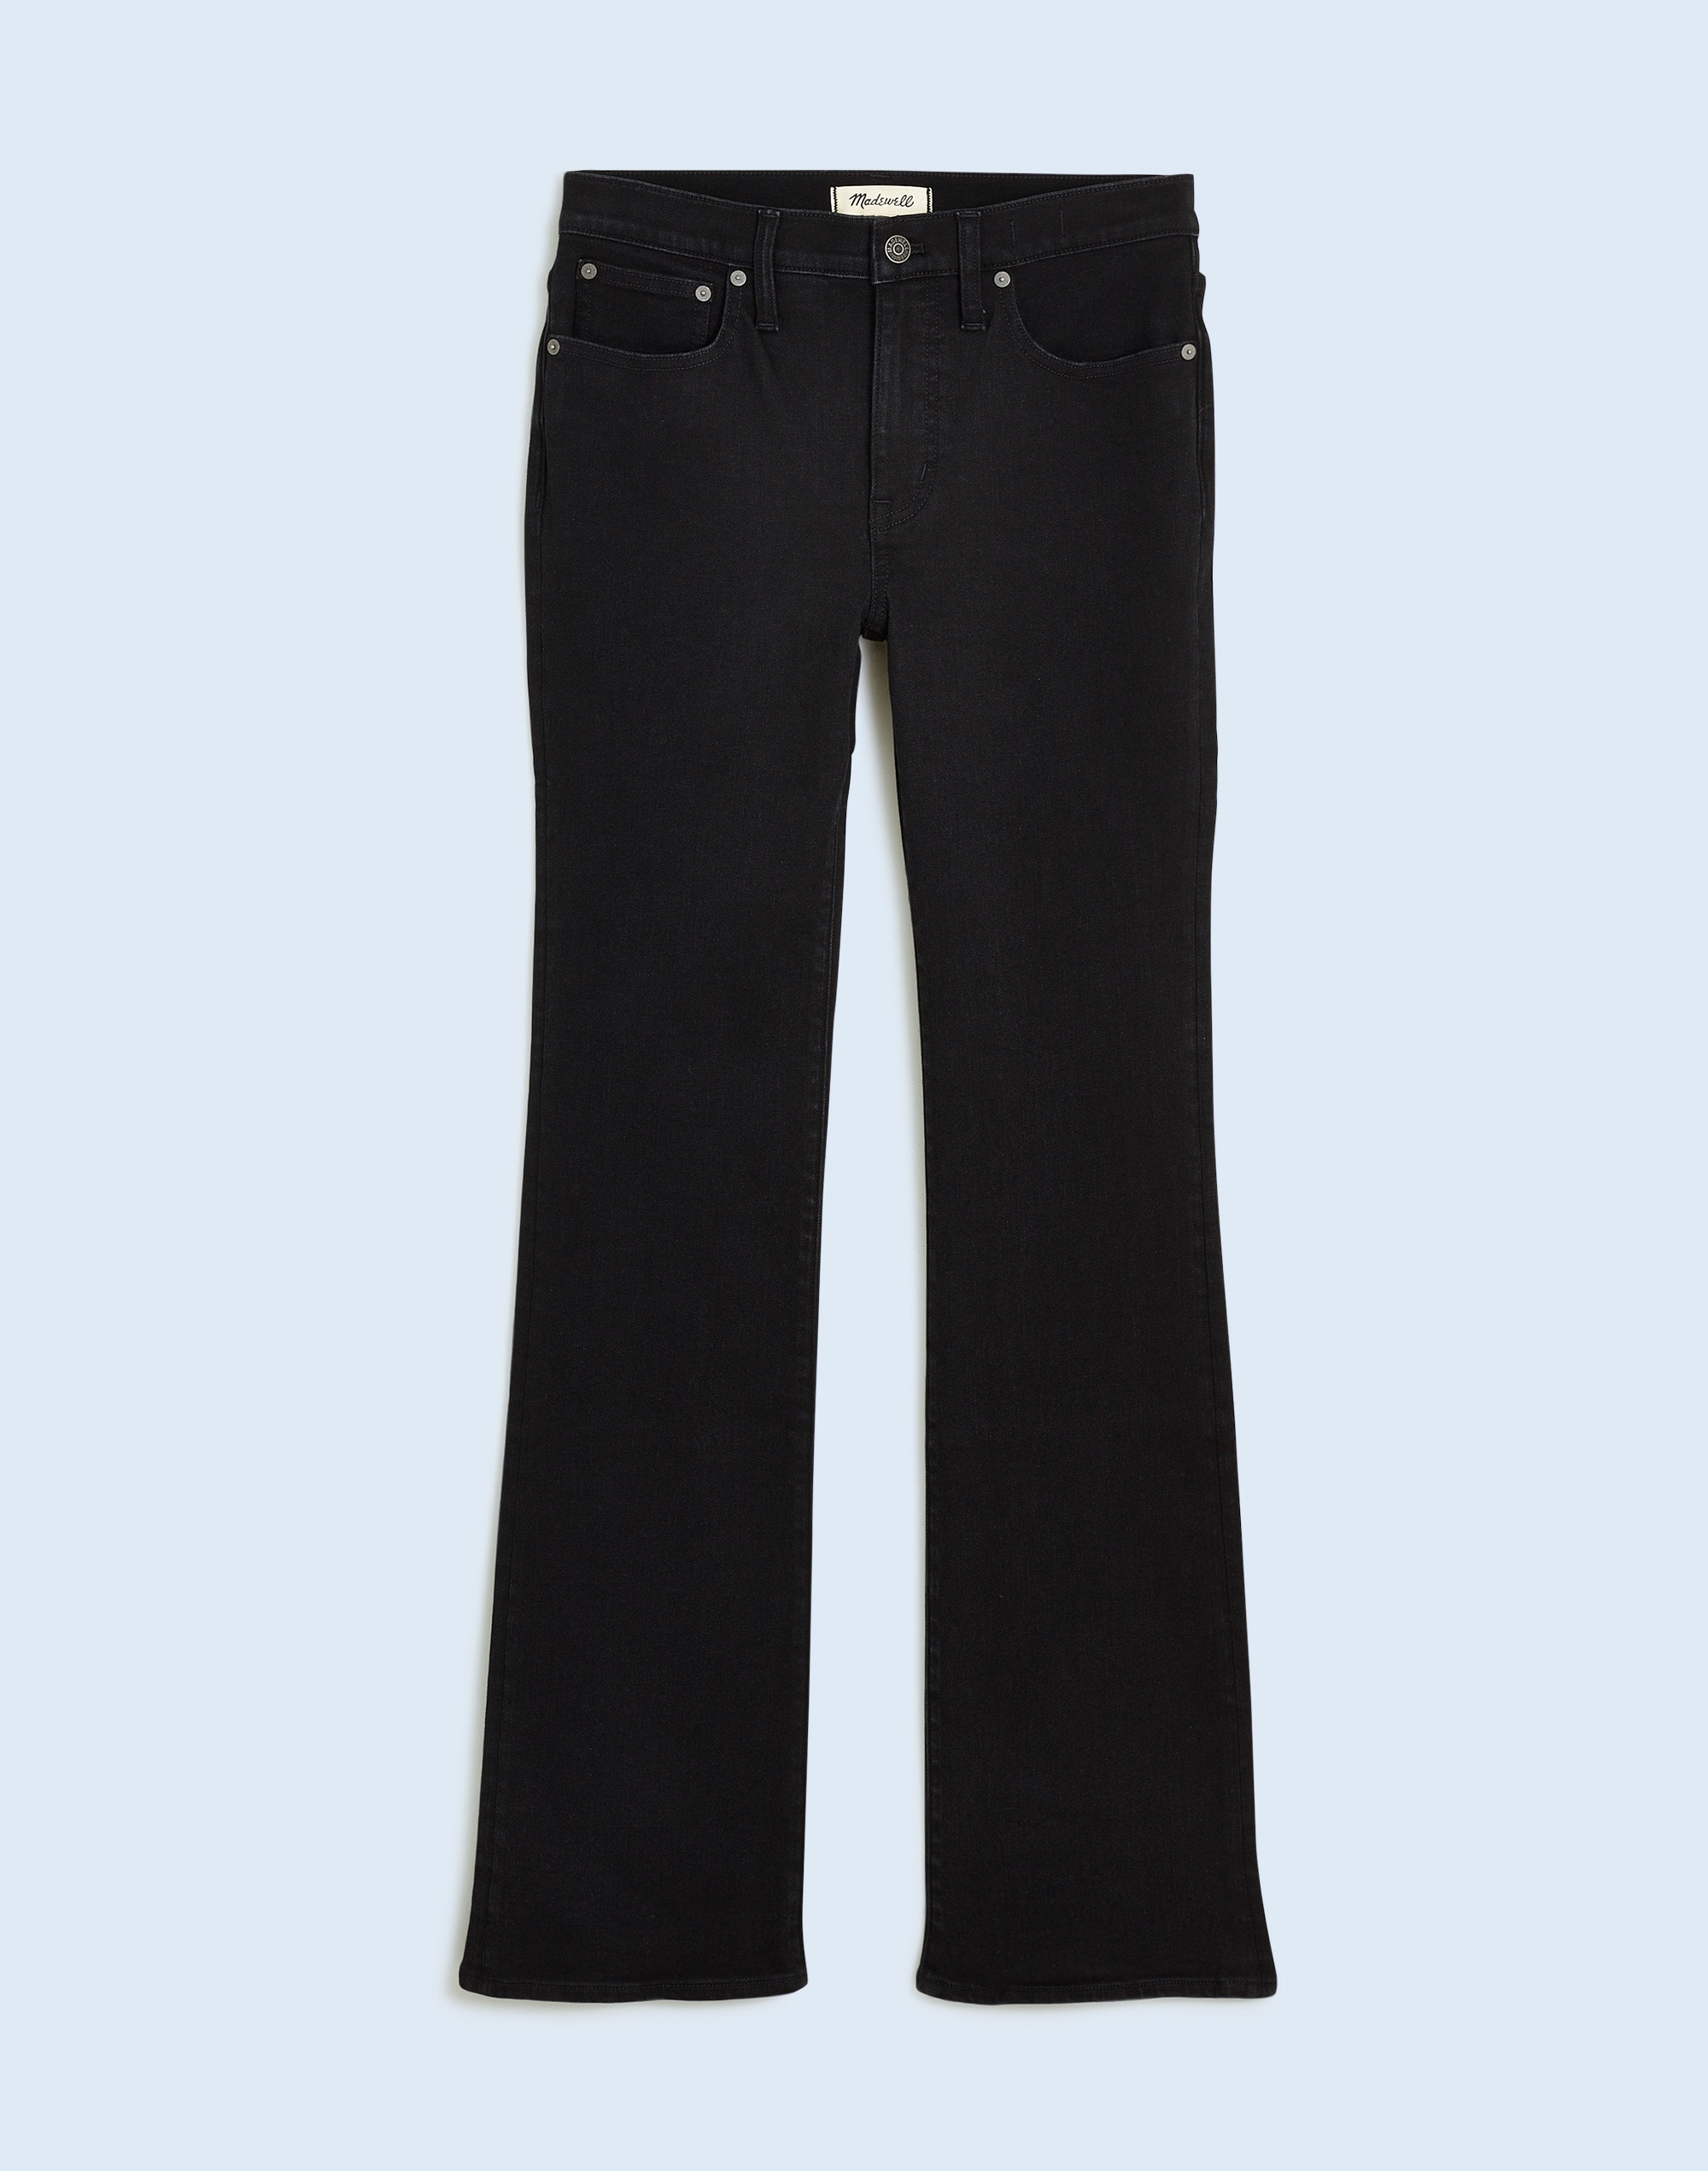 Kick Out Full-Length Jeans Black Frost Wash